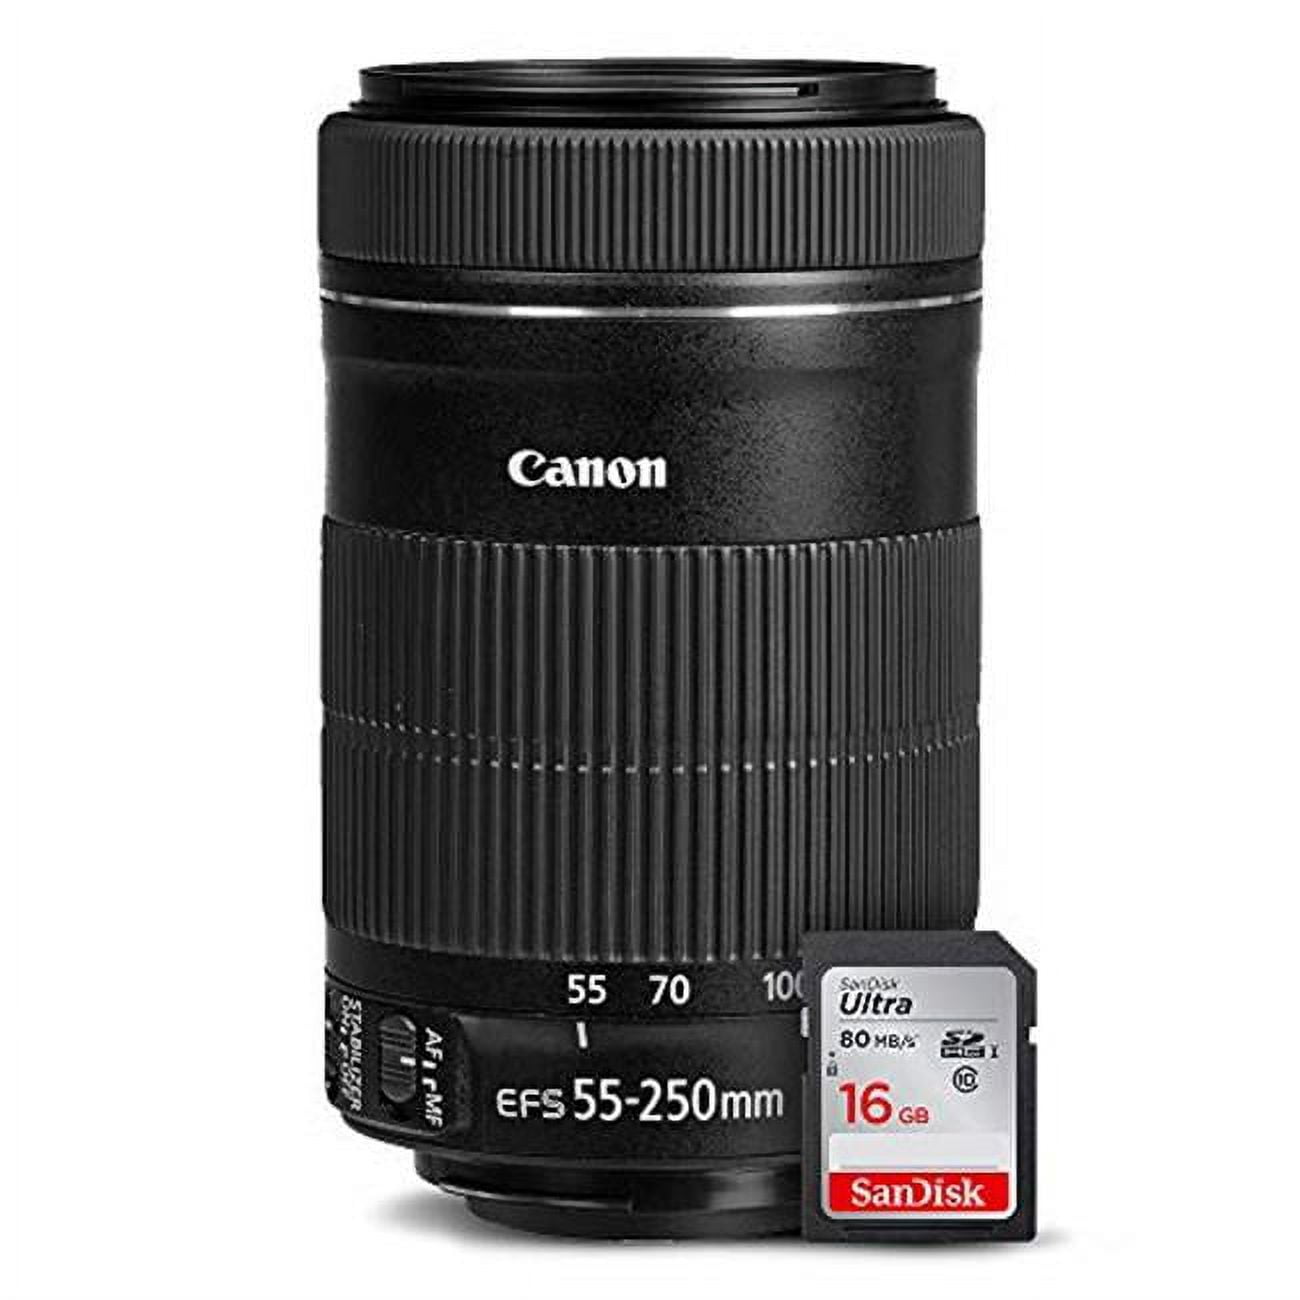 Canon CANON-LENS-55-250-KIT112-NFBA EF-S 55-250 mm f & 4-5.6 IS